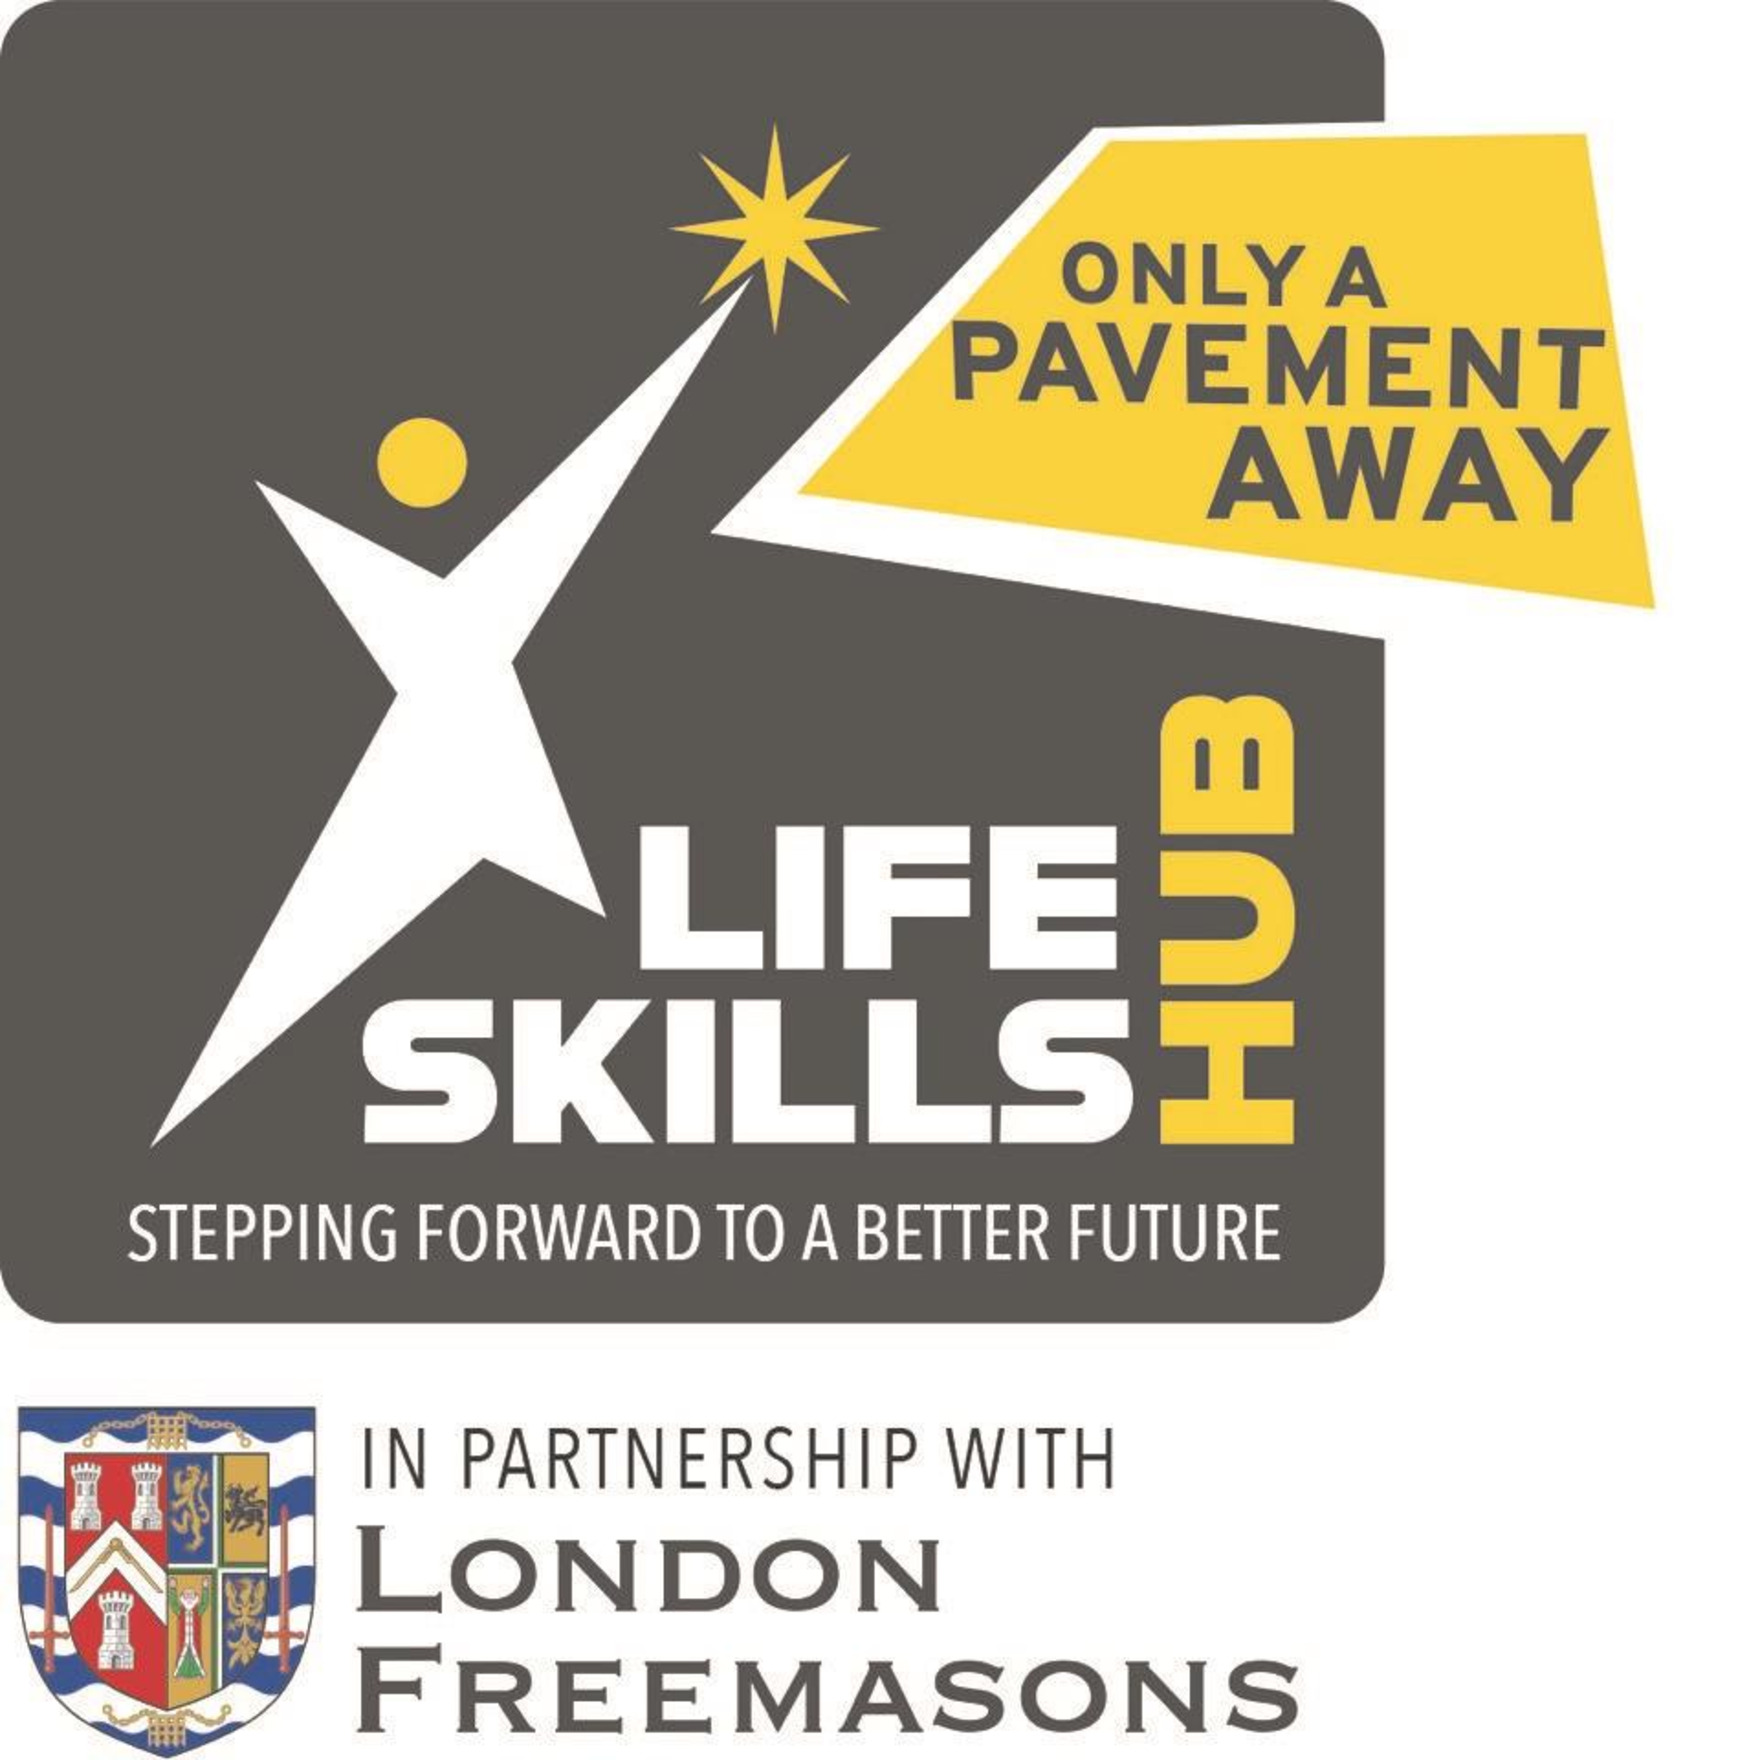 Only A Pavement Away: Helping the Homeless into employment – a charity supported by the Masonic Charitable Foundation